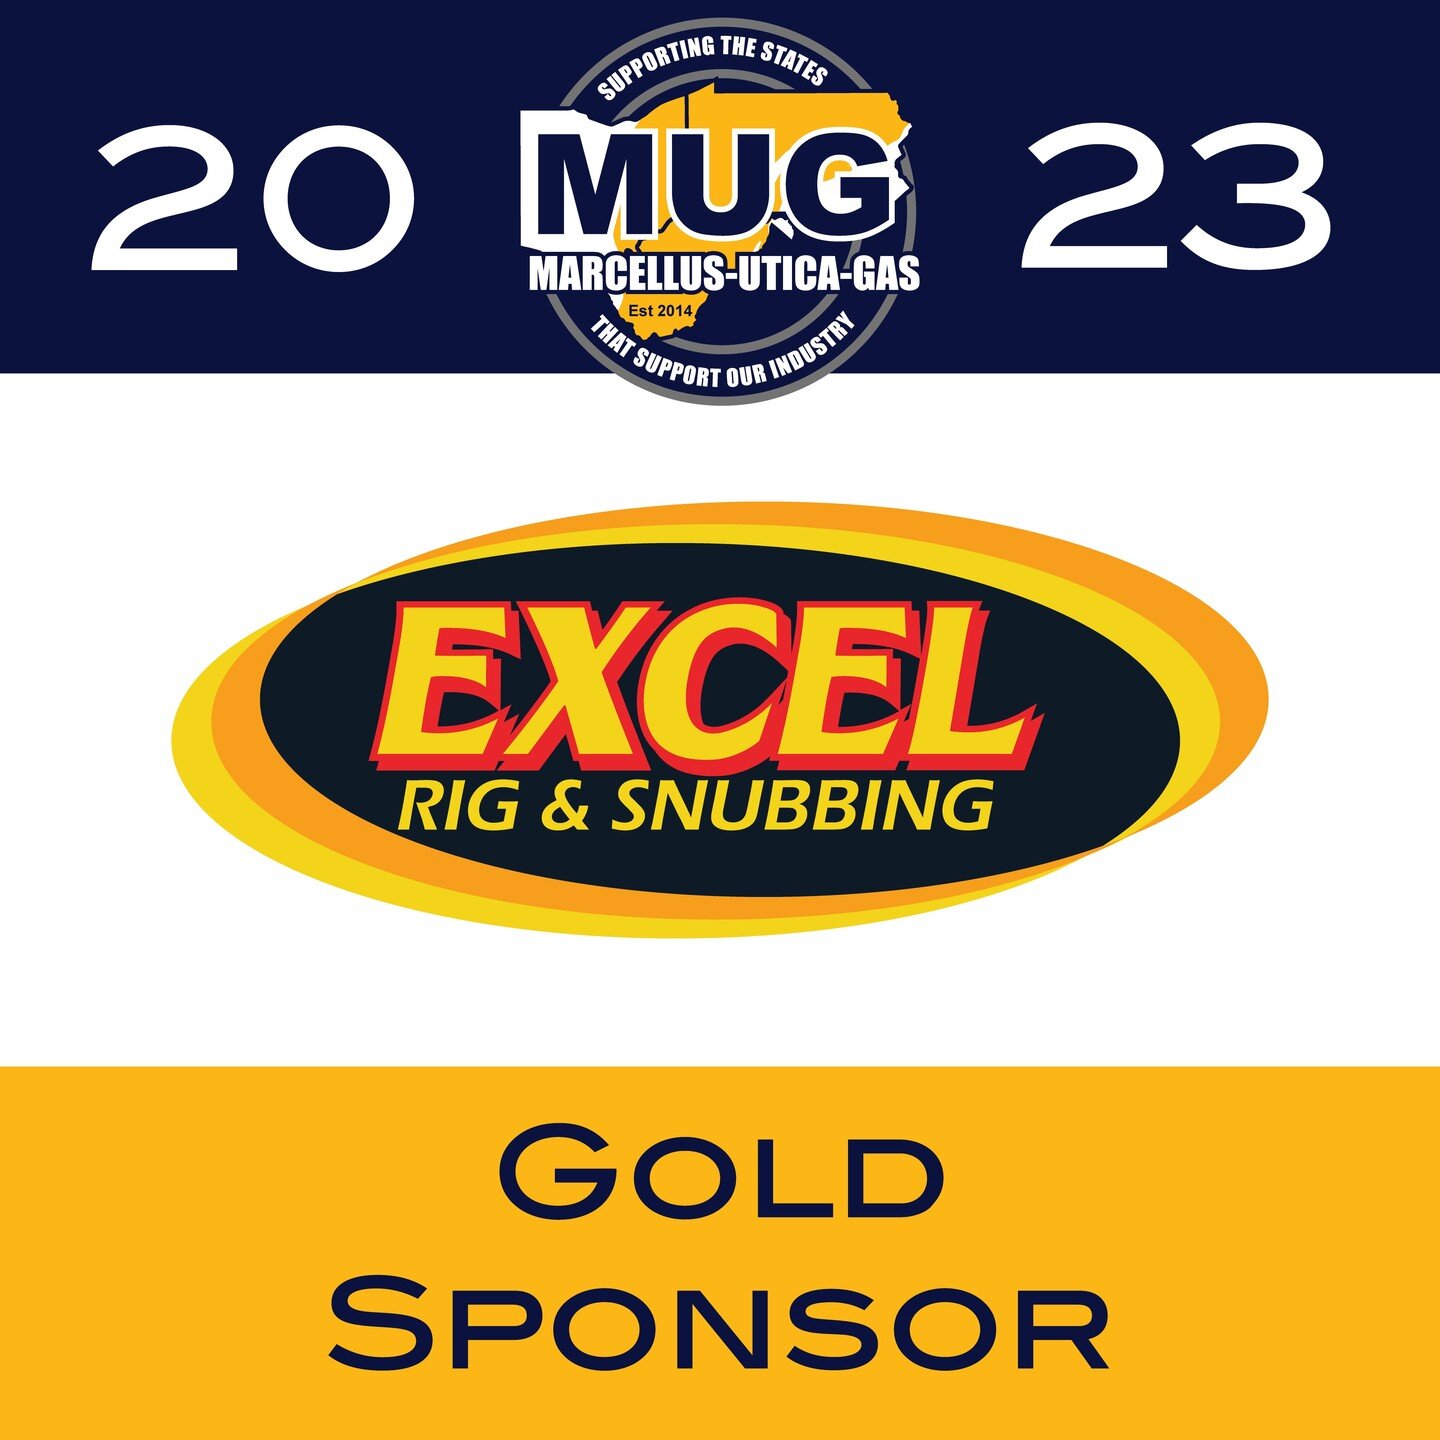 Thank you to our Gold Sponsor, Excel Rig &amp; Snubbing, for your support in 2023!